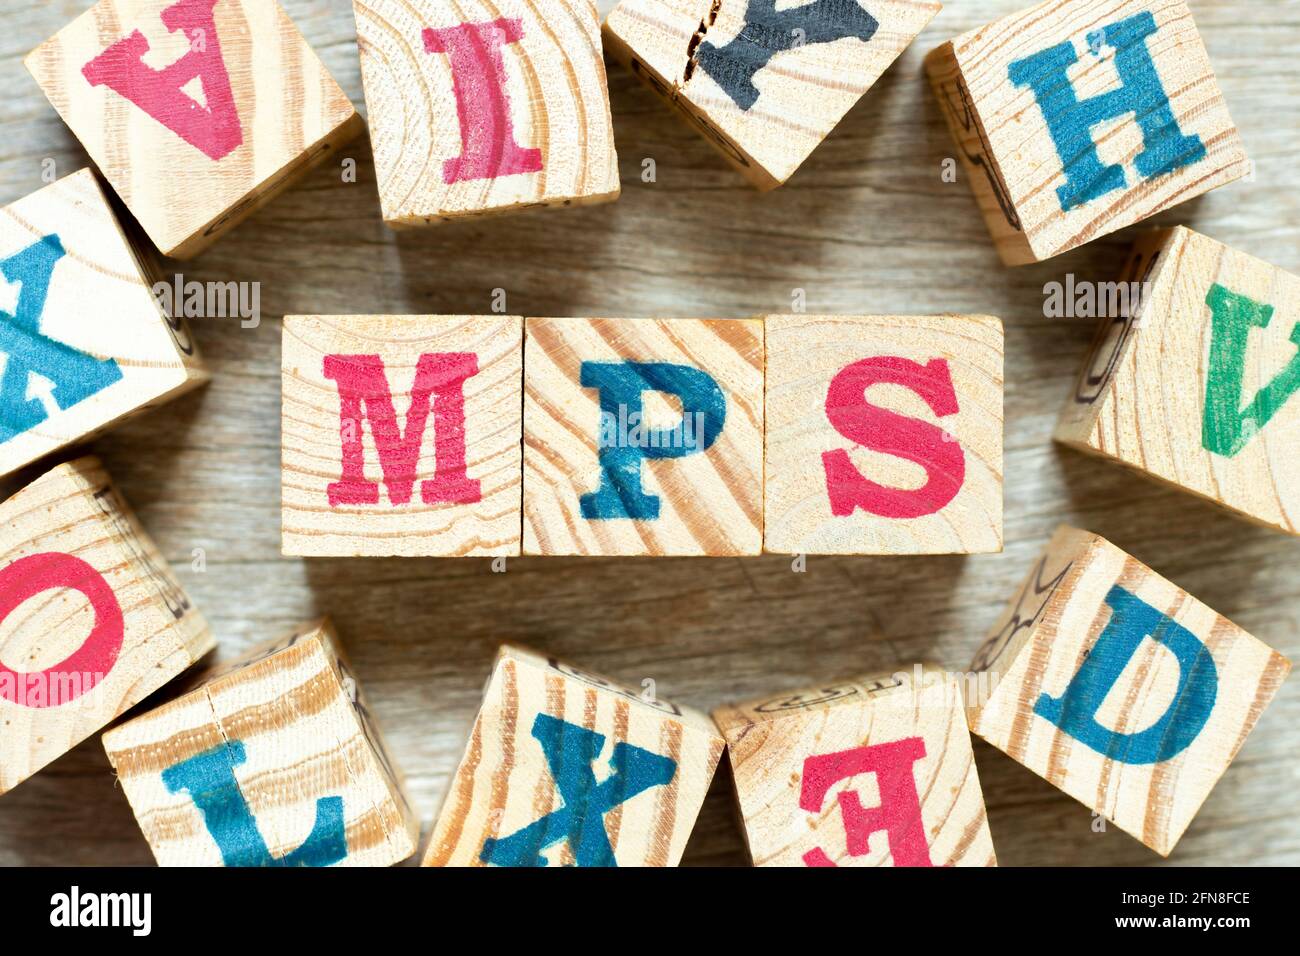 Alphabet letter block in word MPS (Abbreviation of Master Production Schedule or Mucopolysaccharidosis) with another on wood background Stock Photo